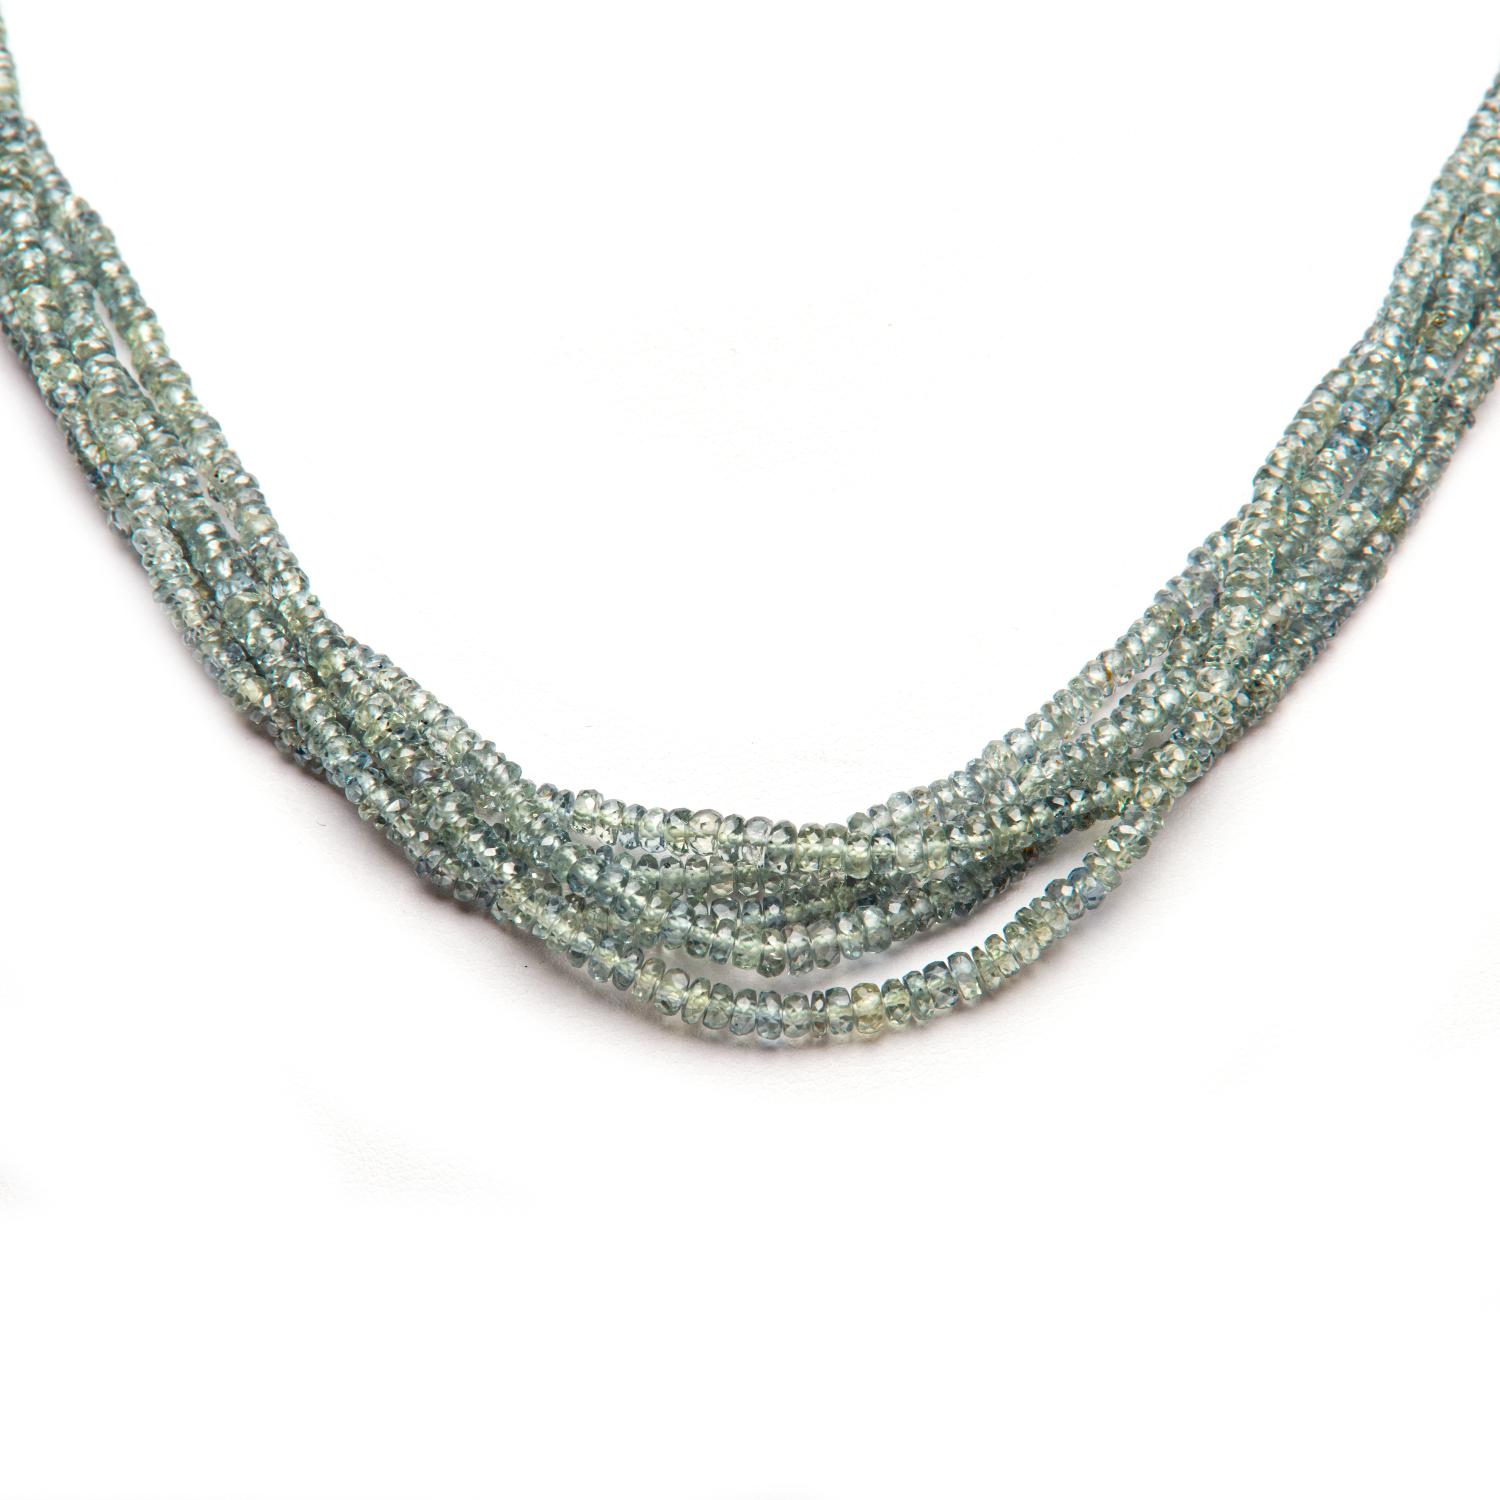 The Australian Green Sapphire Multi Row Bead Necklace has a gorgeous luminous soft green colour and is a great piece for every day wear.  Wear it twisted for a more formal look or loose for a casual nonchalent look. The length of the necklace is